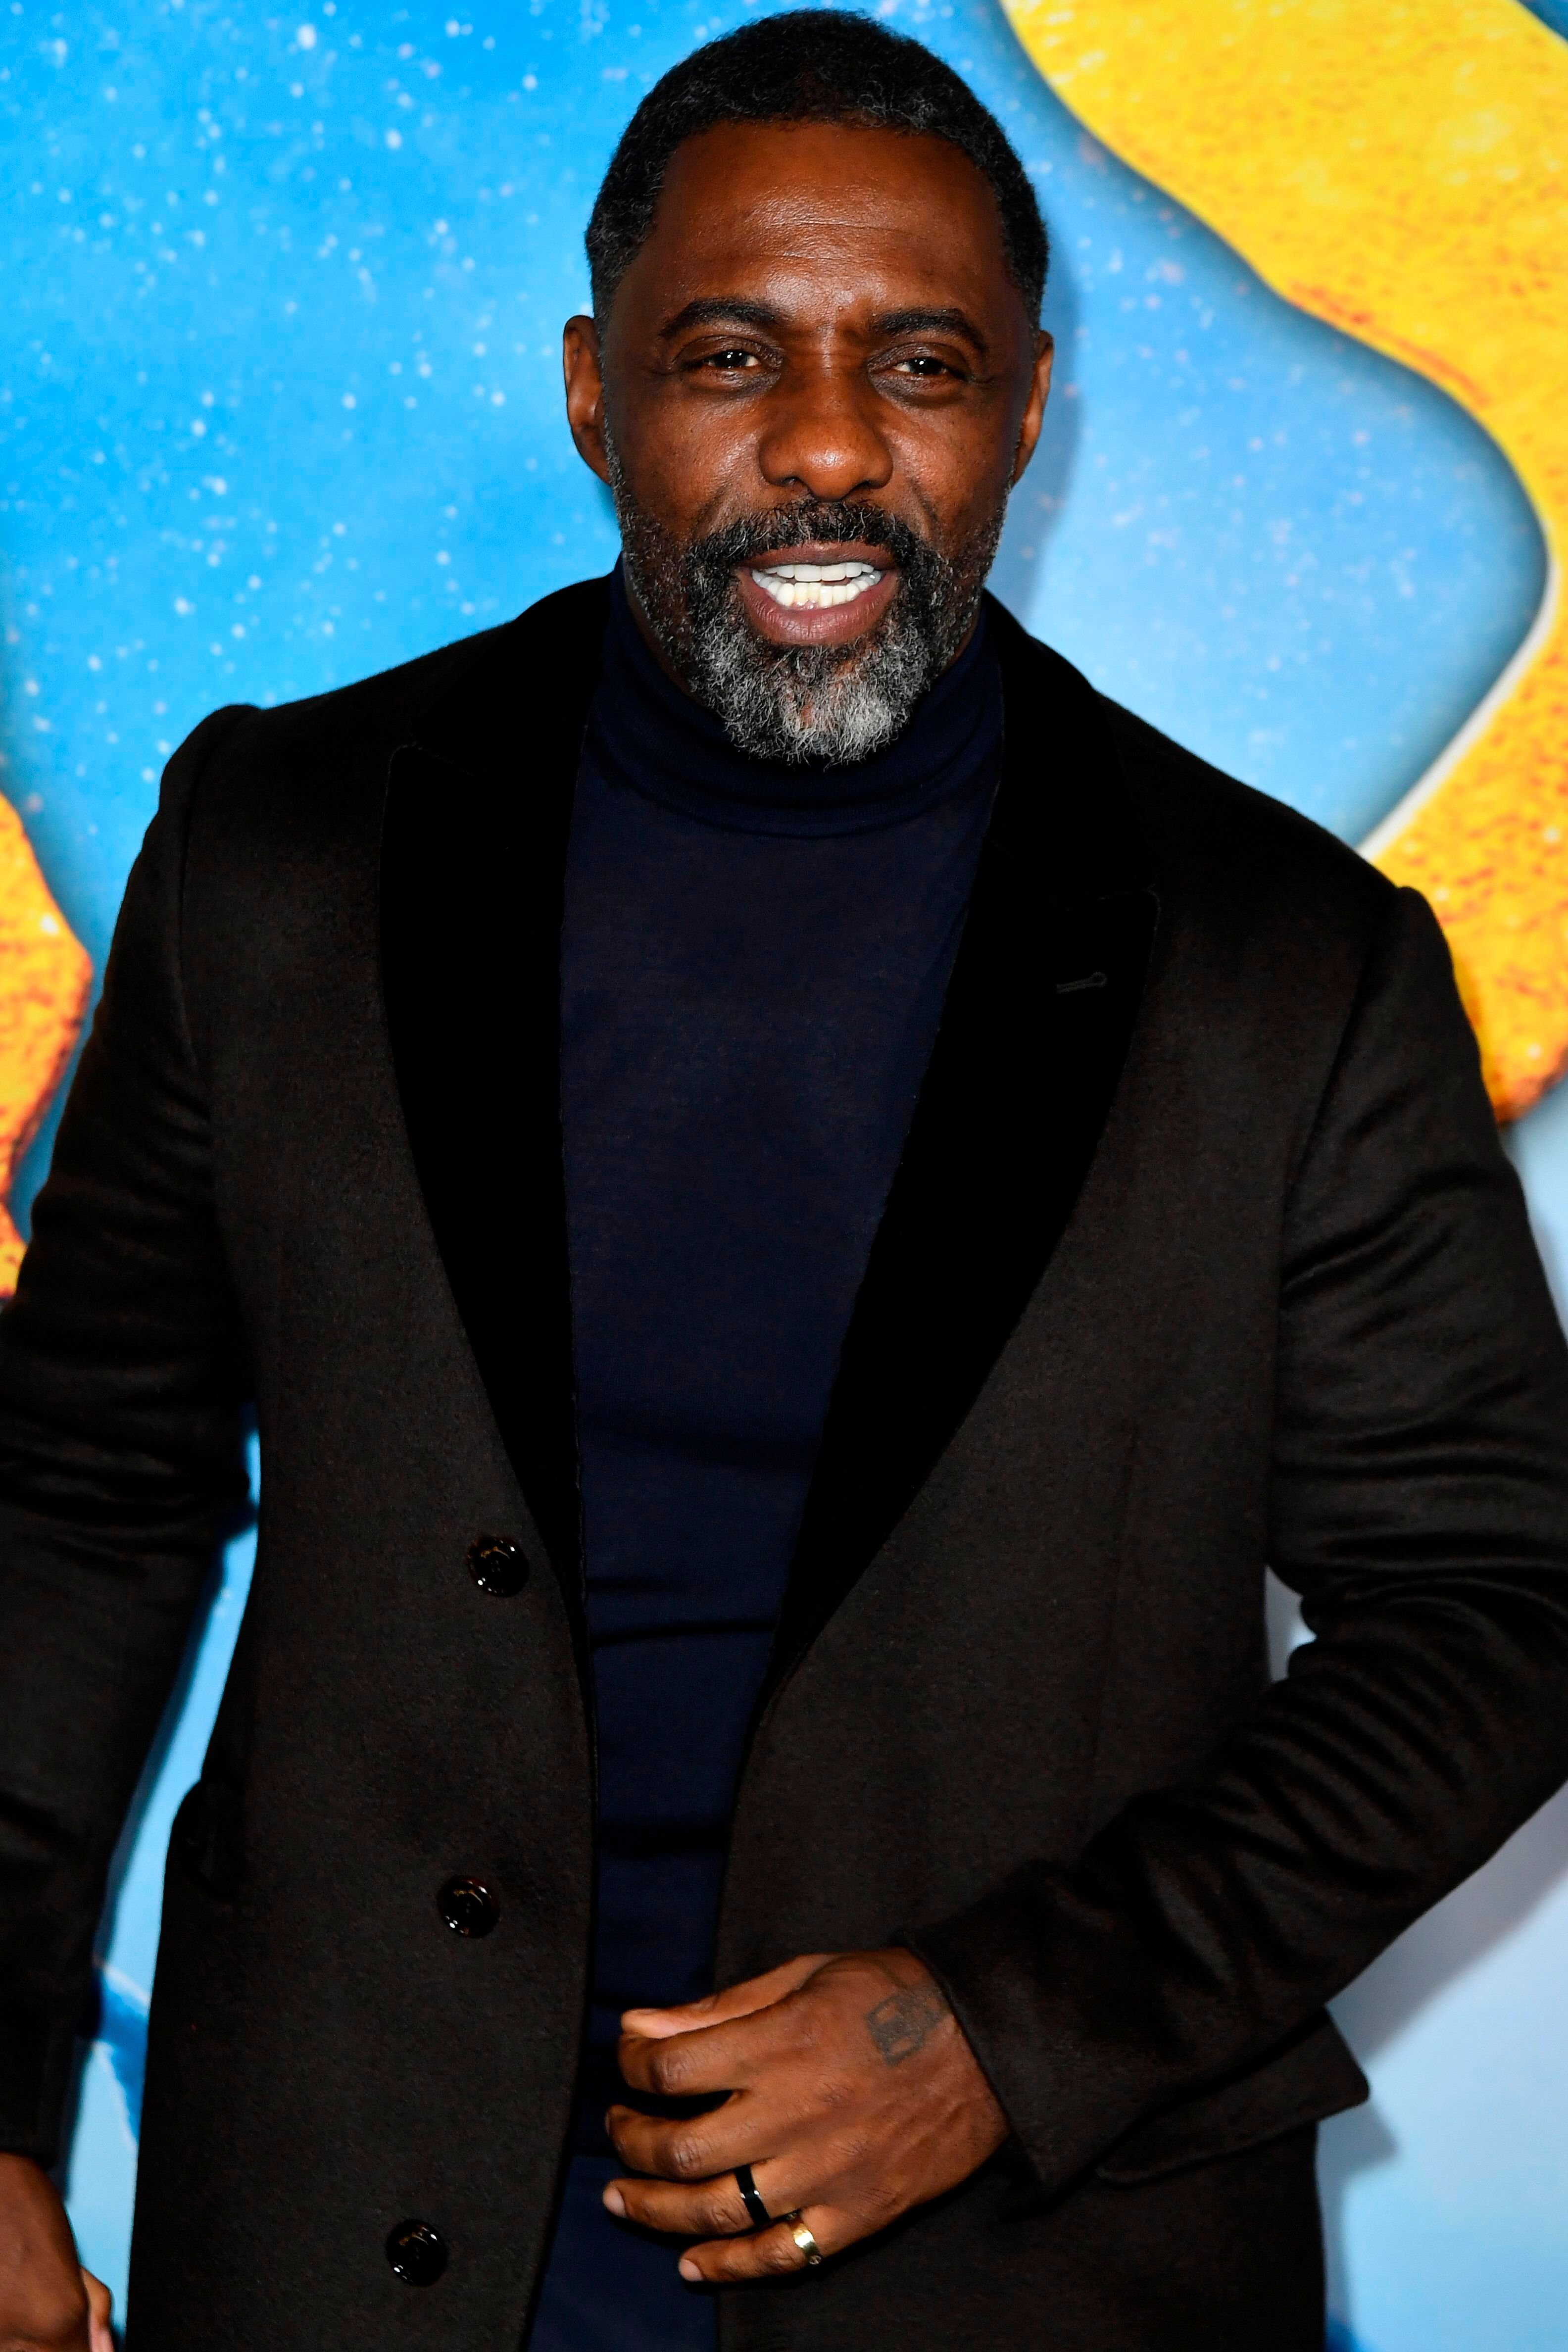  Idris Elba during the world premiere of "Cats" at the Alice Tully Hall in New York City, on December 16, 2019. | Source: Getty Images